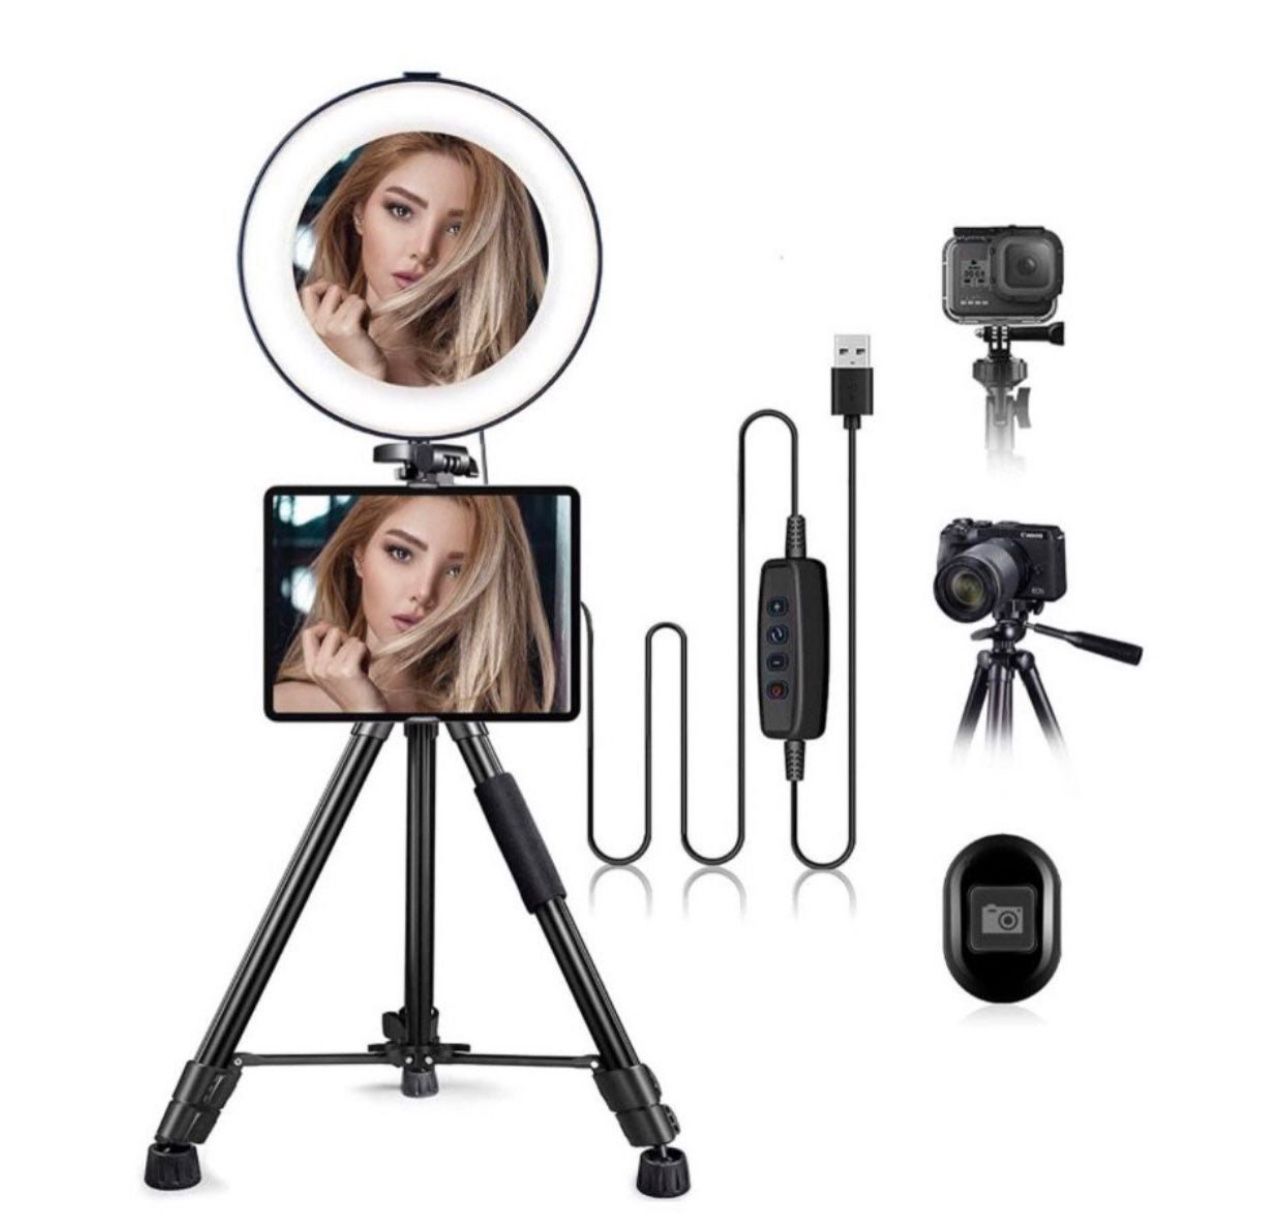 10.2" Selfie Ring Light with Stand & iPad/Phone Holder